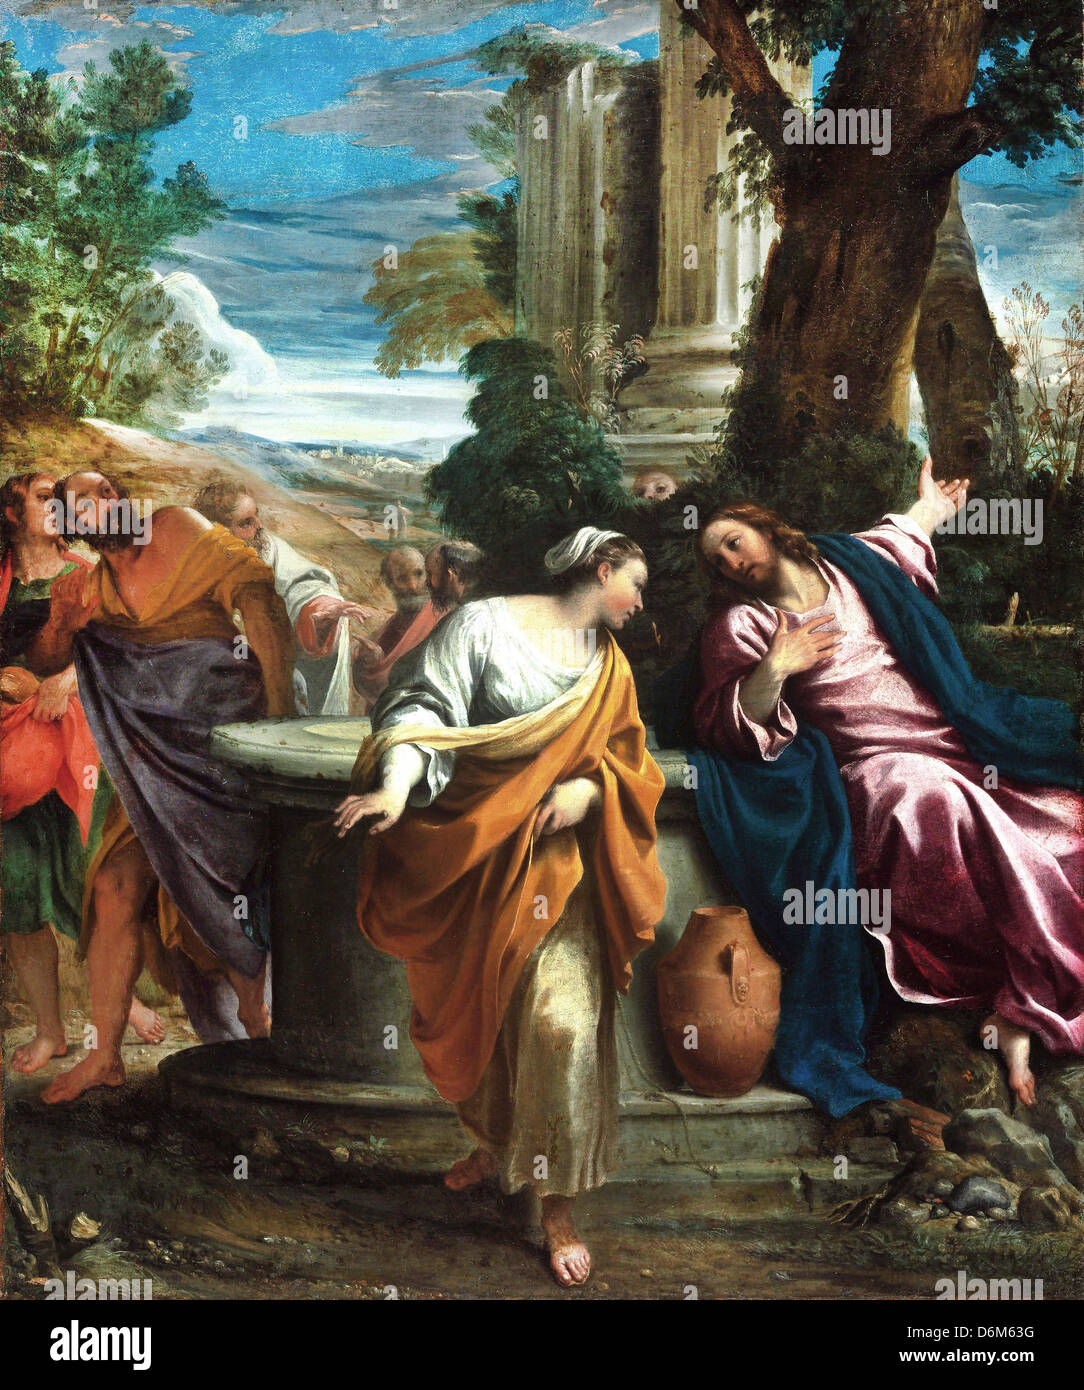 Annibale Carracci, Christ and the Samaritan Woman 1595-1597 Oil on canvas. Museum of Fine Arts, Budapest Stock Photo